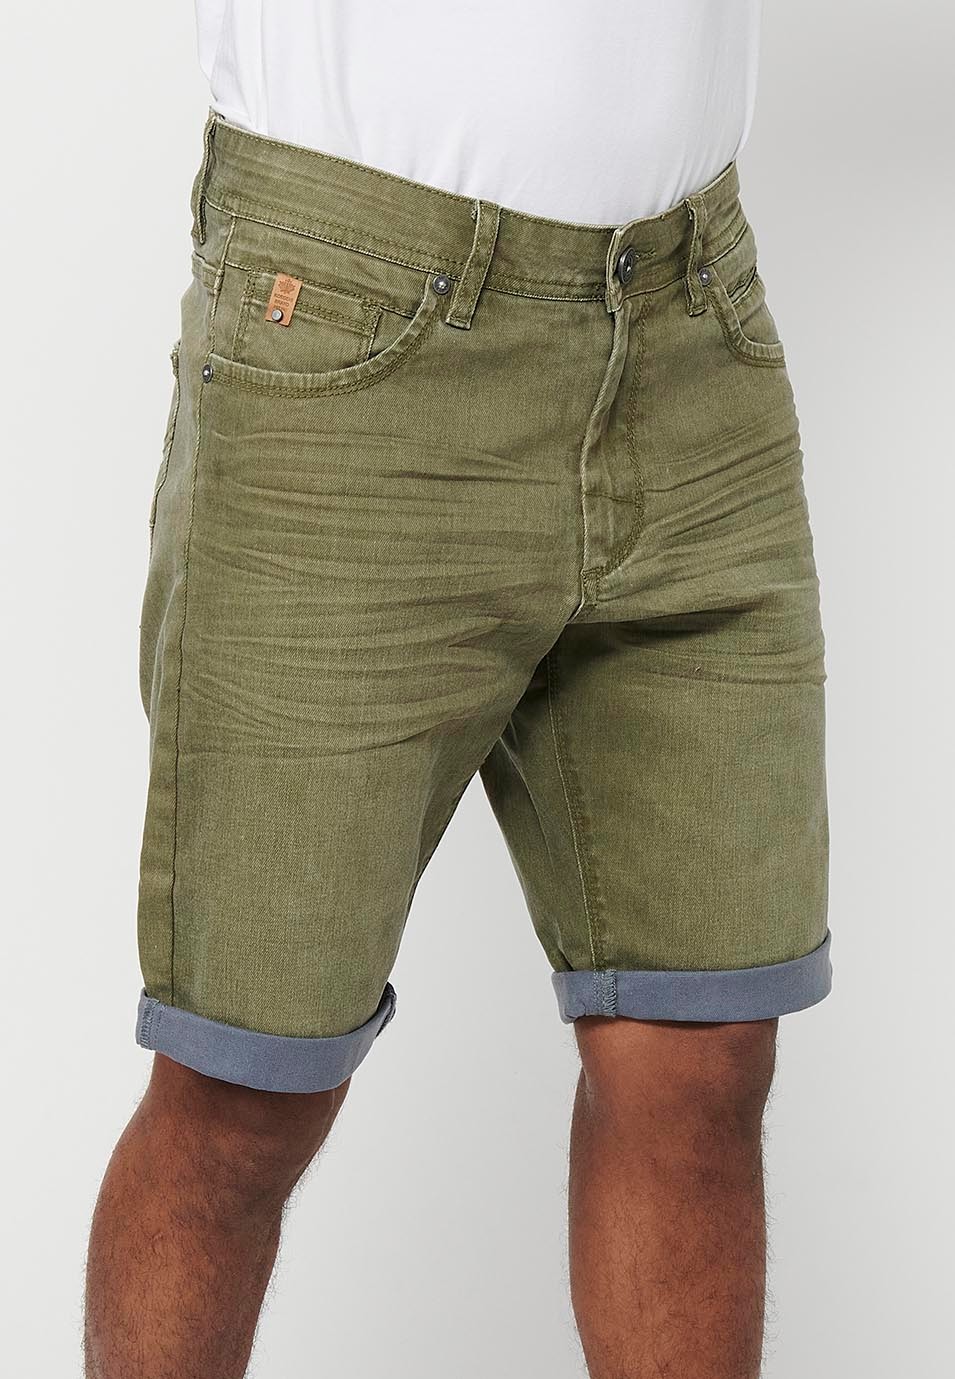 Denim Bermuda shorts with turn-up finish, front closure with zipper and button with five pockets, one pocket pocket, Olive Color for Men 5